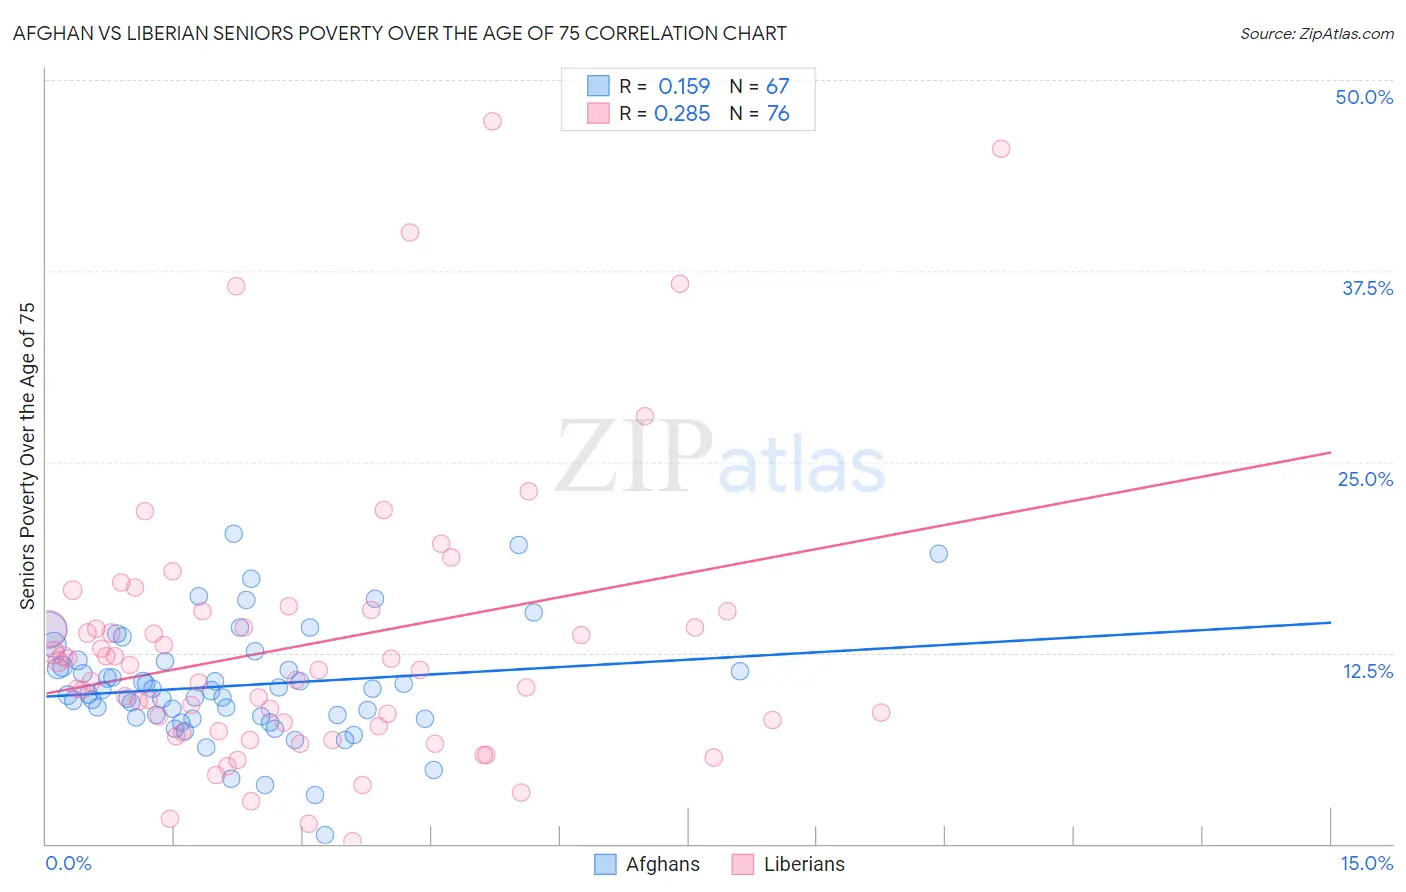 Afghan vs Liberian Seniors Poverty Over the Age of 75